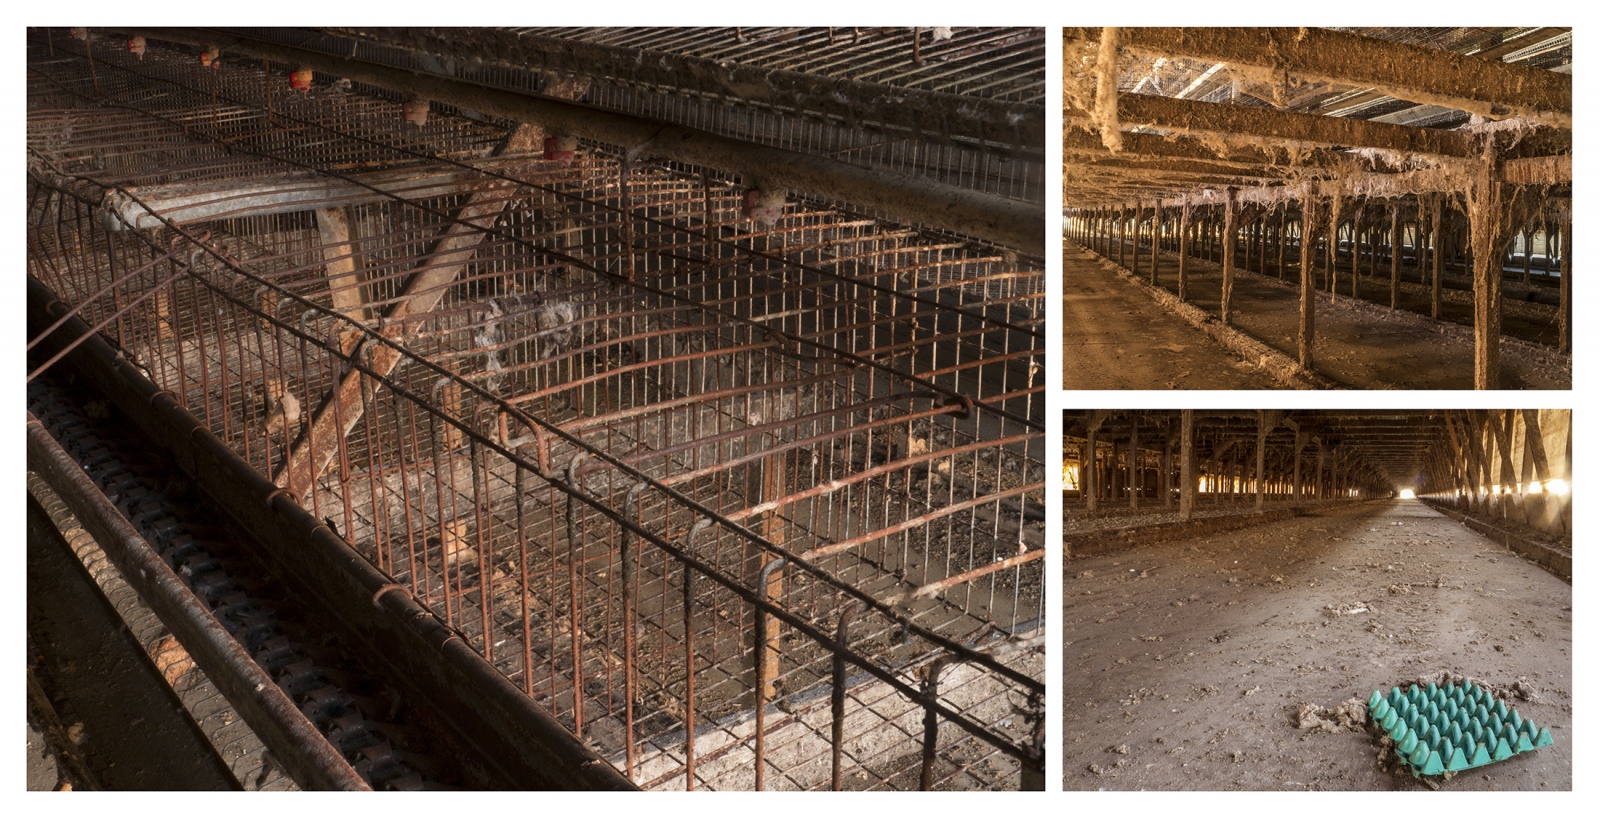 A&amp;L Poultry - Abandoned Battery Cage Facility, 2013